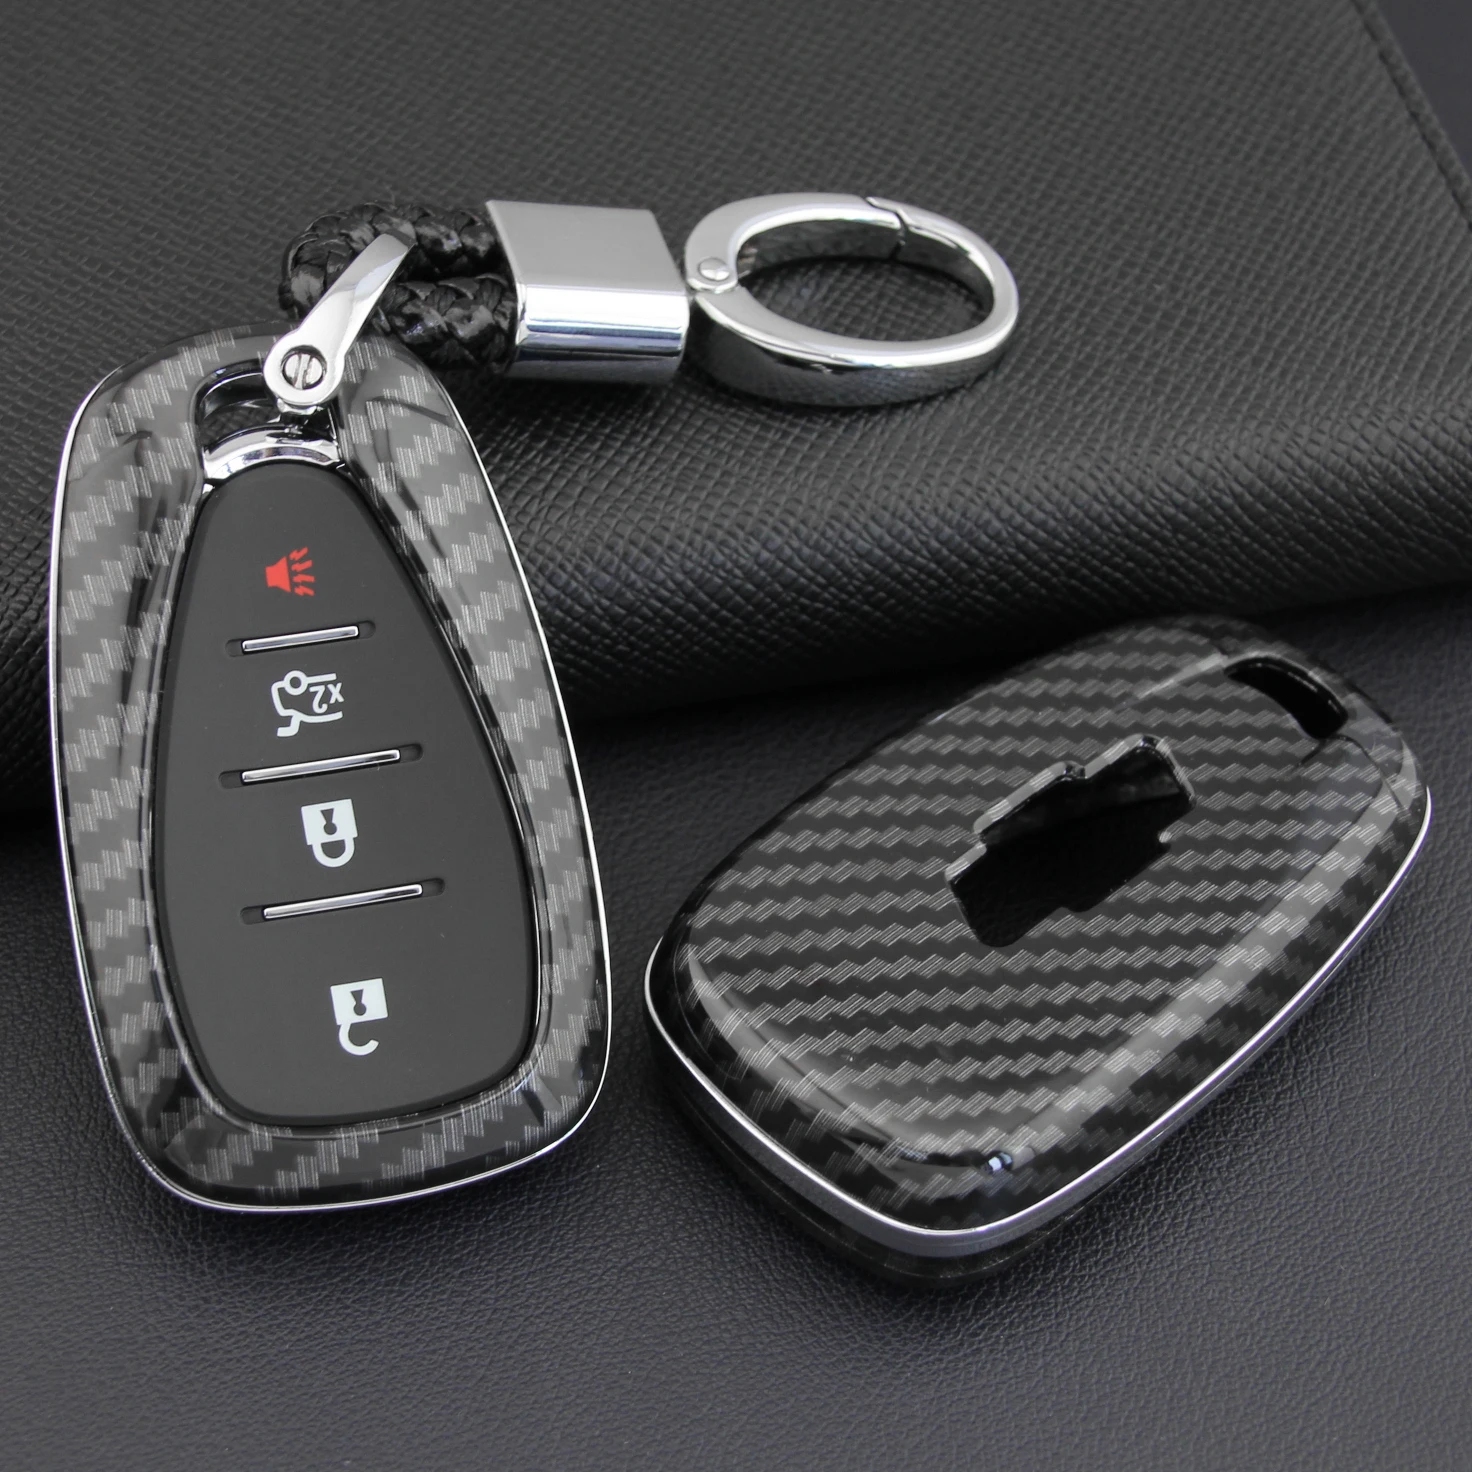 Coolbestda 2Pcs Silicone Key Fob Cover Case Skin Jacket Remote Shell Wallet for Chevrolet Chevy 2016 2017 2018 Camaro Cruze Flip/Folding Key NOT FIT 